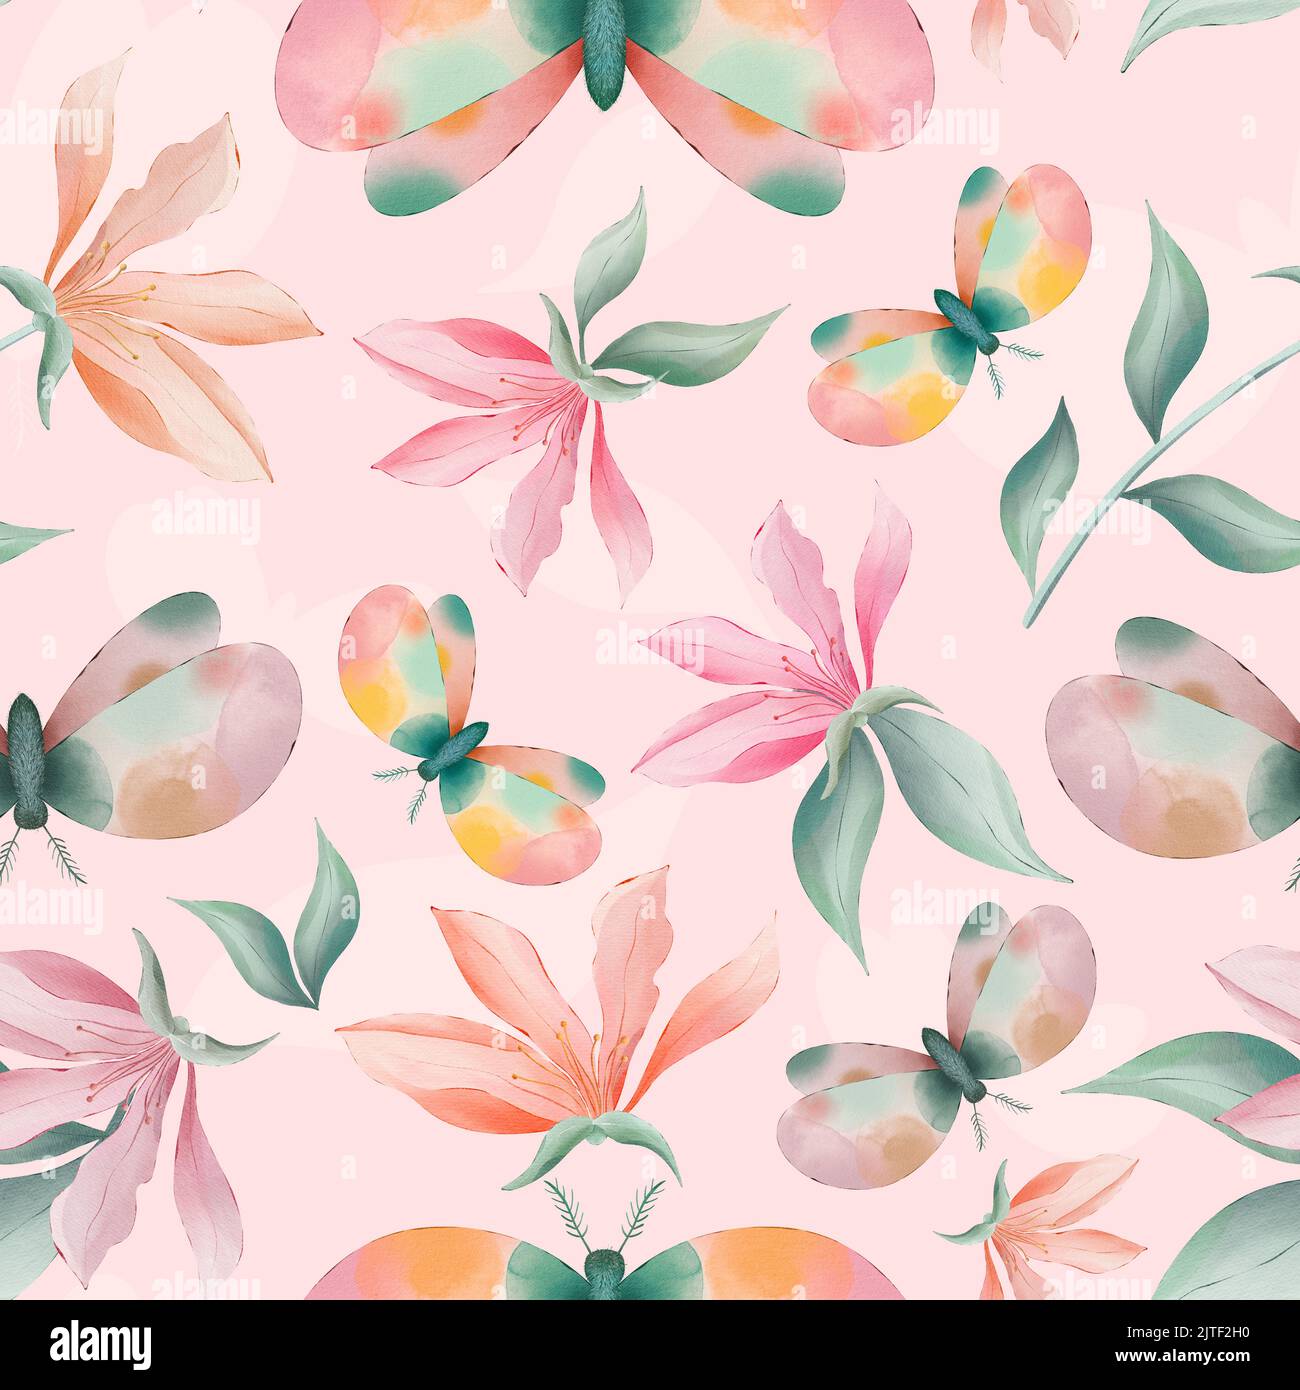 Magnolia flowers and moths seamless pattern Stock Photo